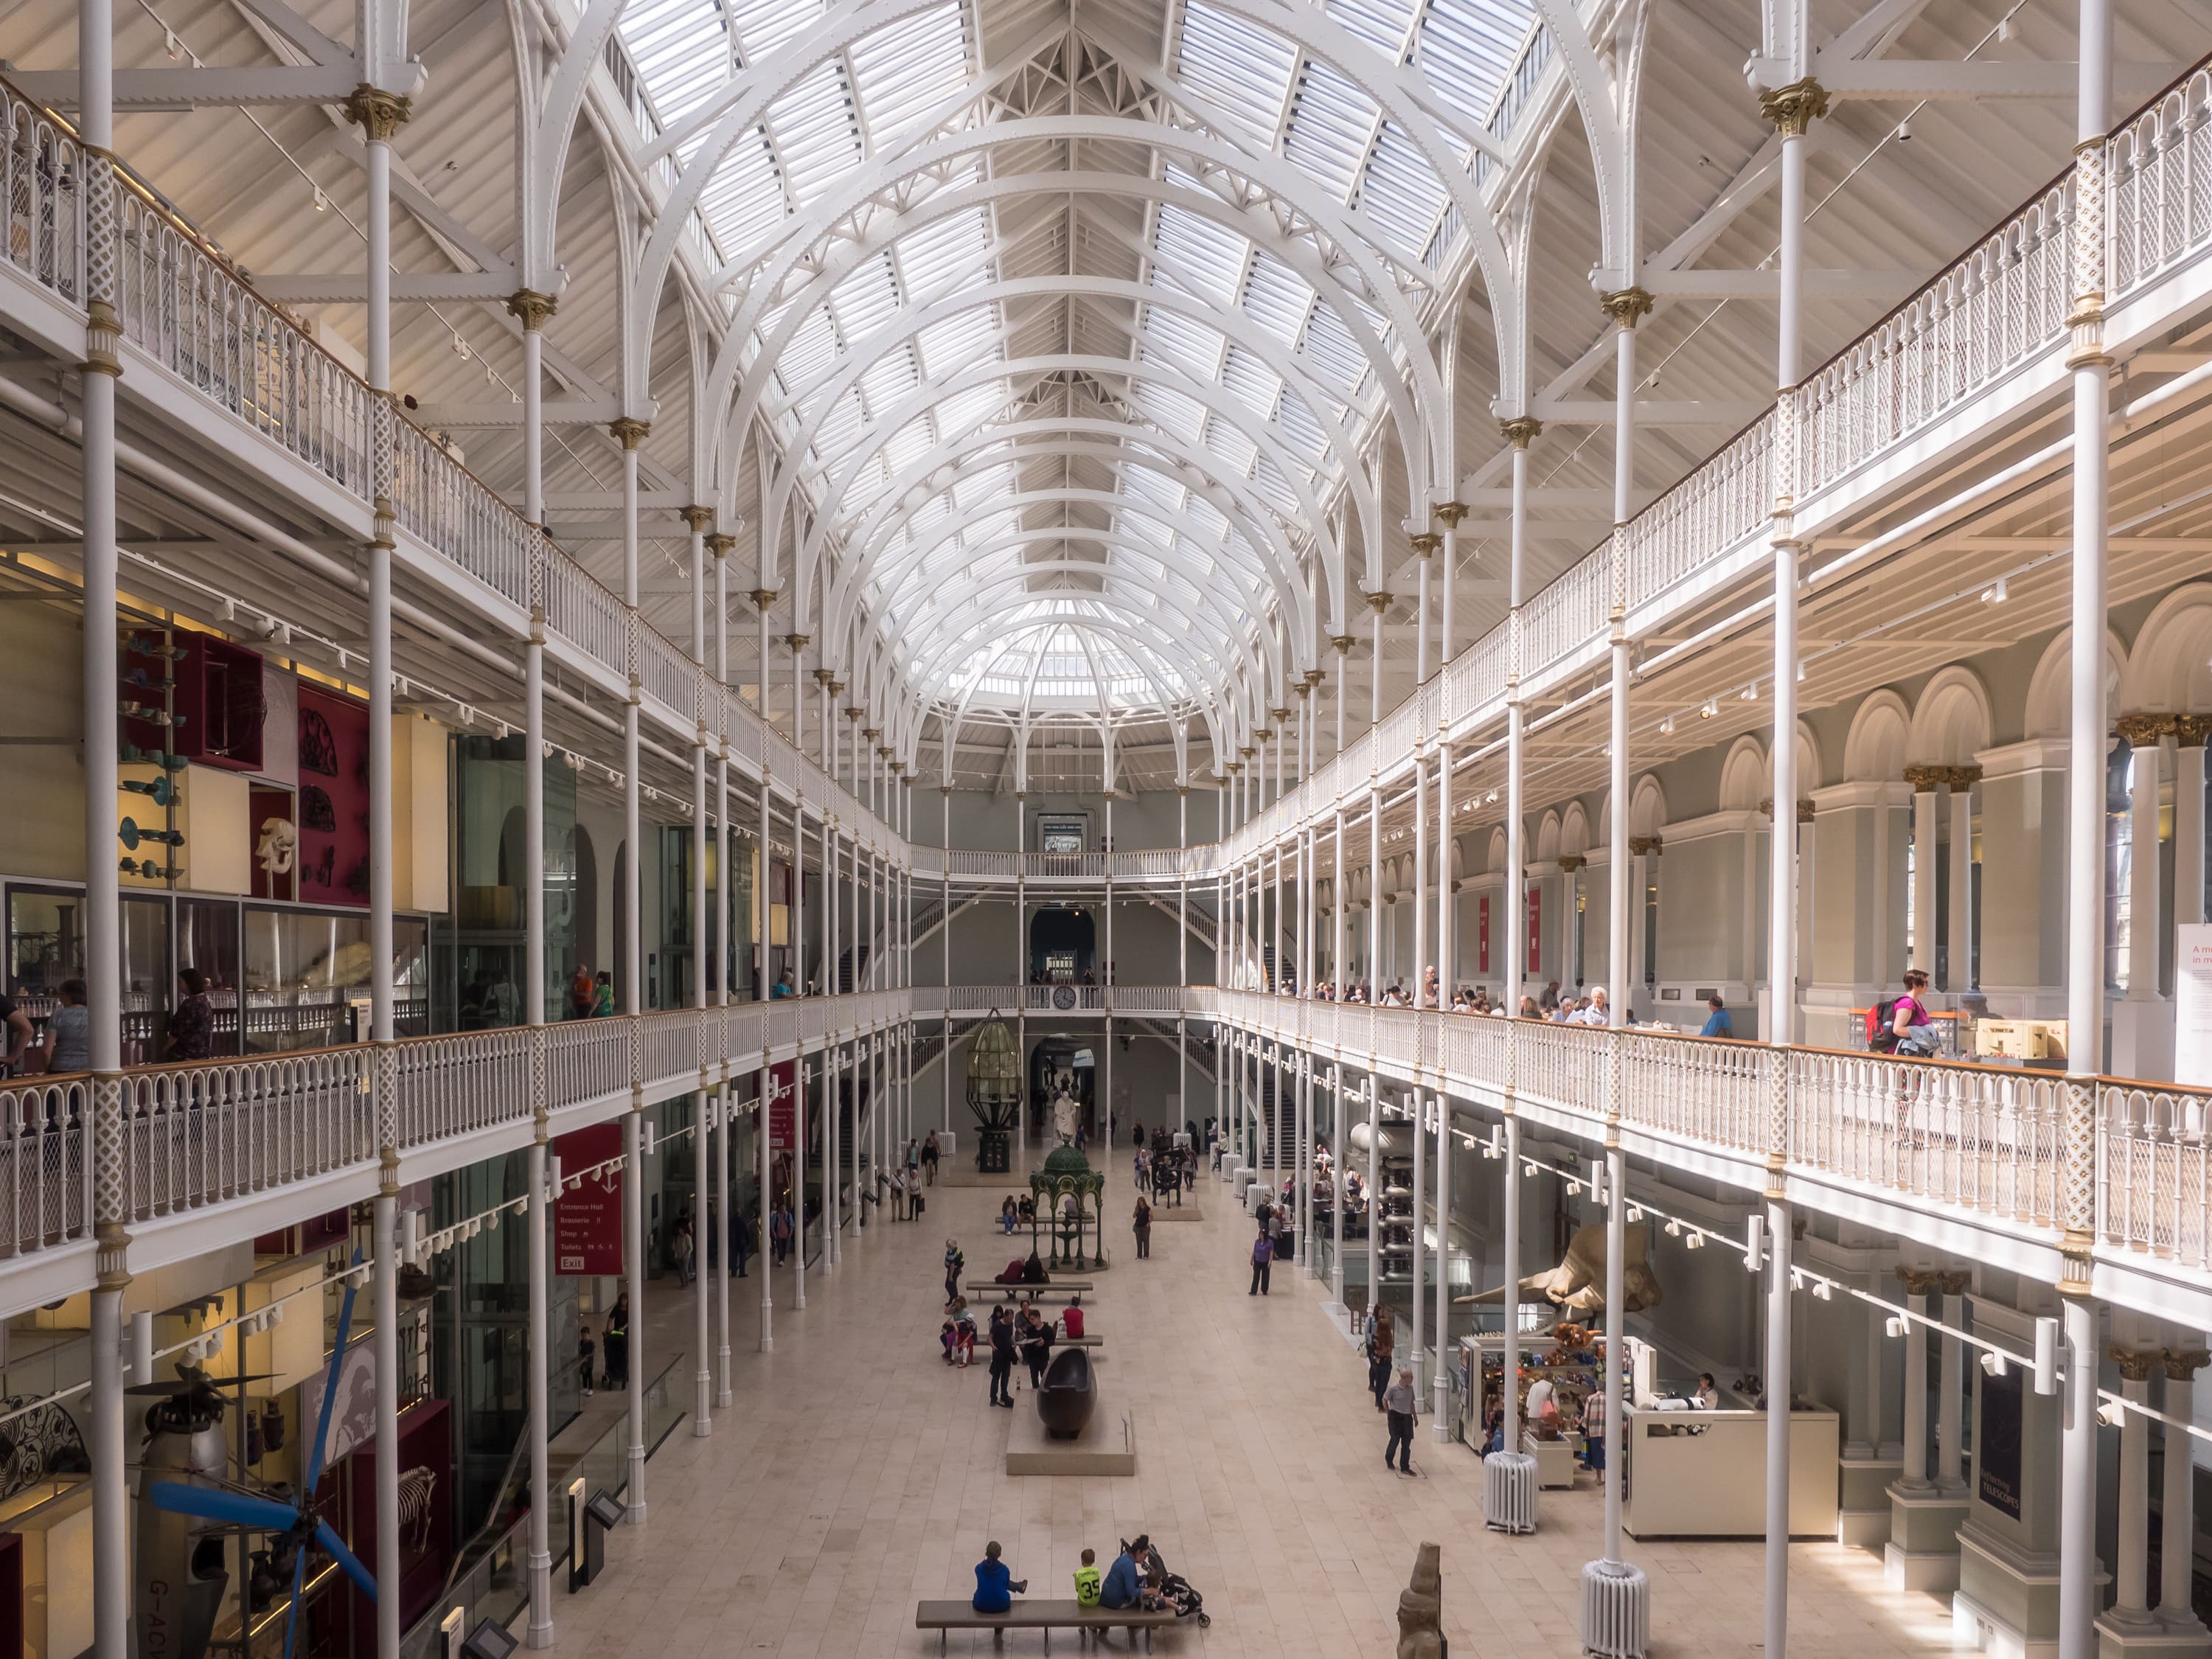 An interior shot of the National Museum of Scotland, showing exhibition floors on several layers